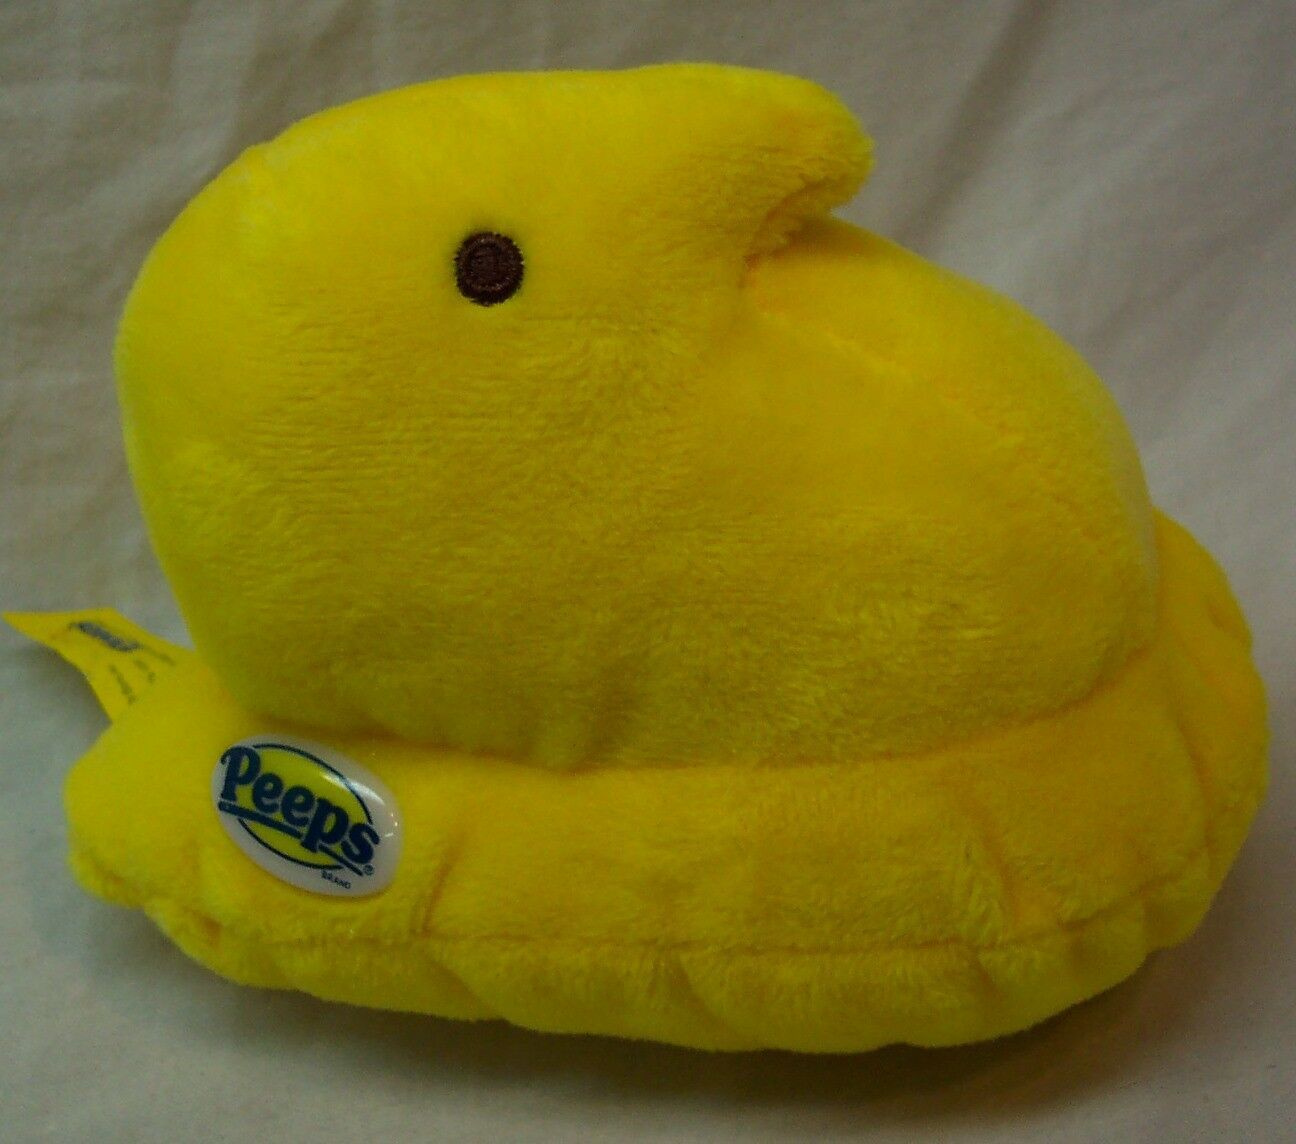 Primary image for Just Born Peeps SOFT YELLOW CHICK PEEP 5" Plush STUFFED ANIMAL TOY